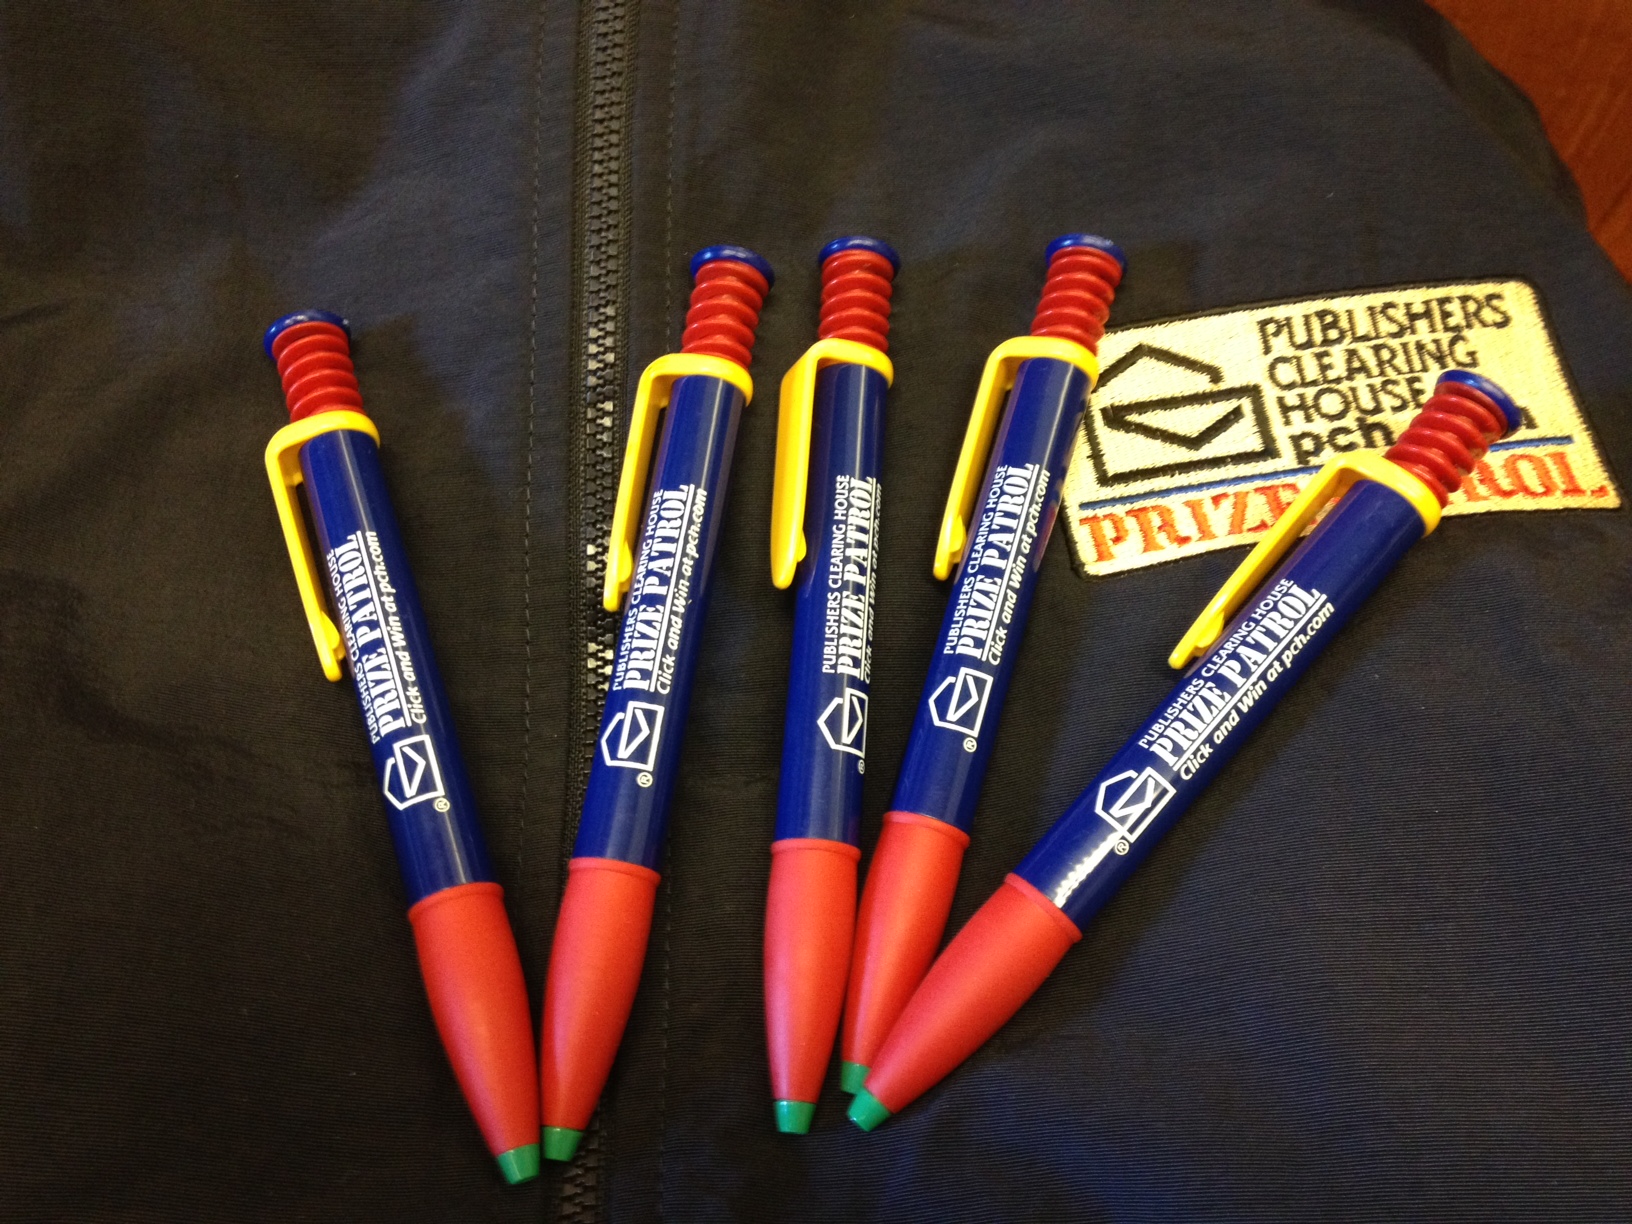 You could win a PCH Prize Patrol Pen